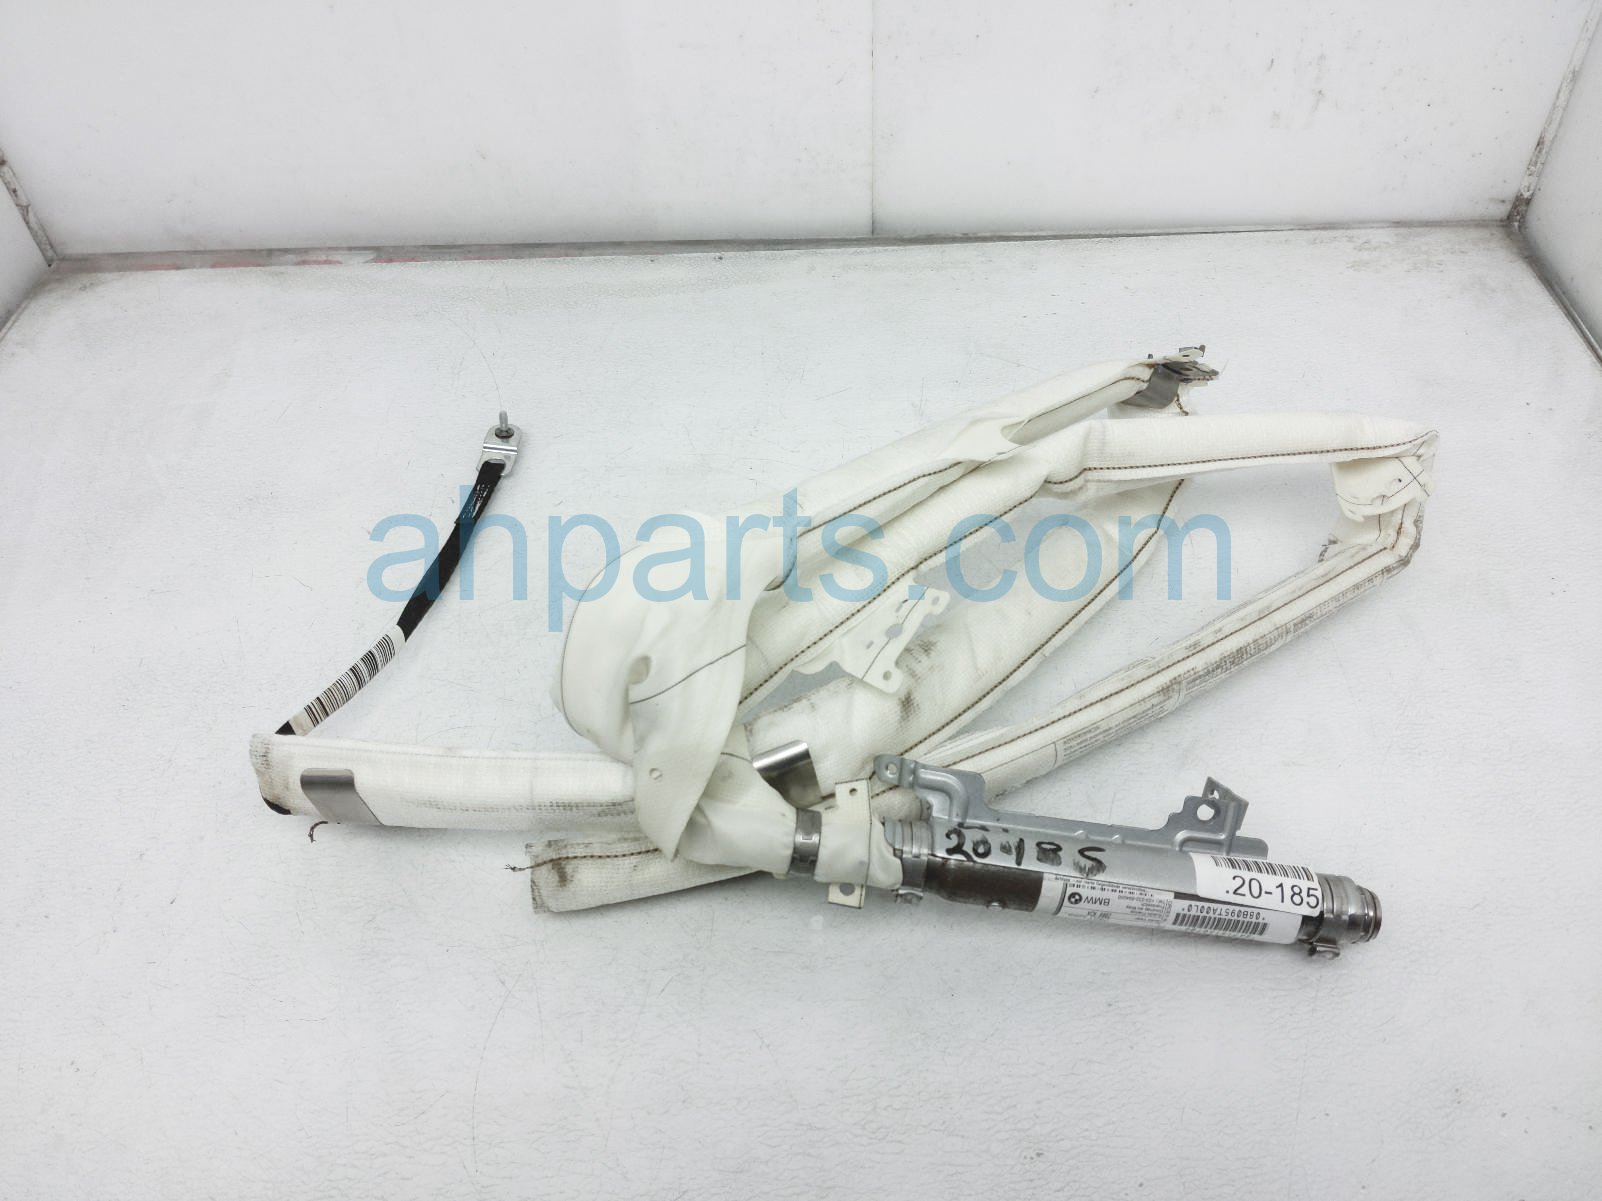 $75 BMW DRIVER ROOF CURTAIN AIRBAG